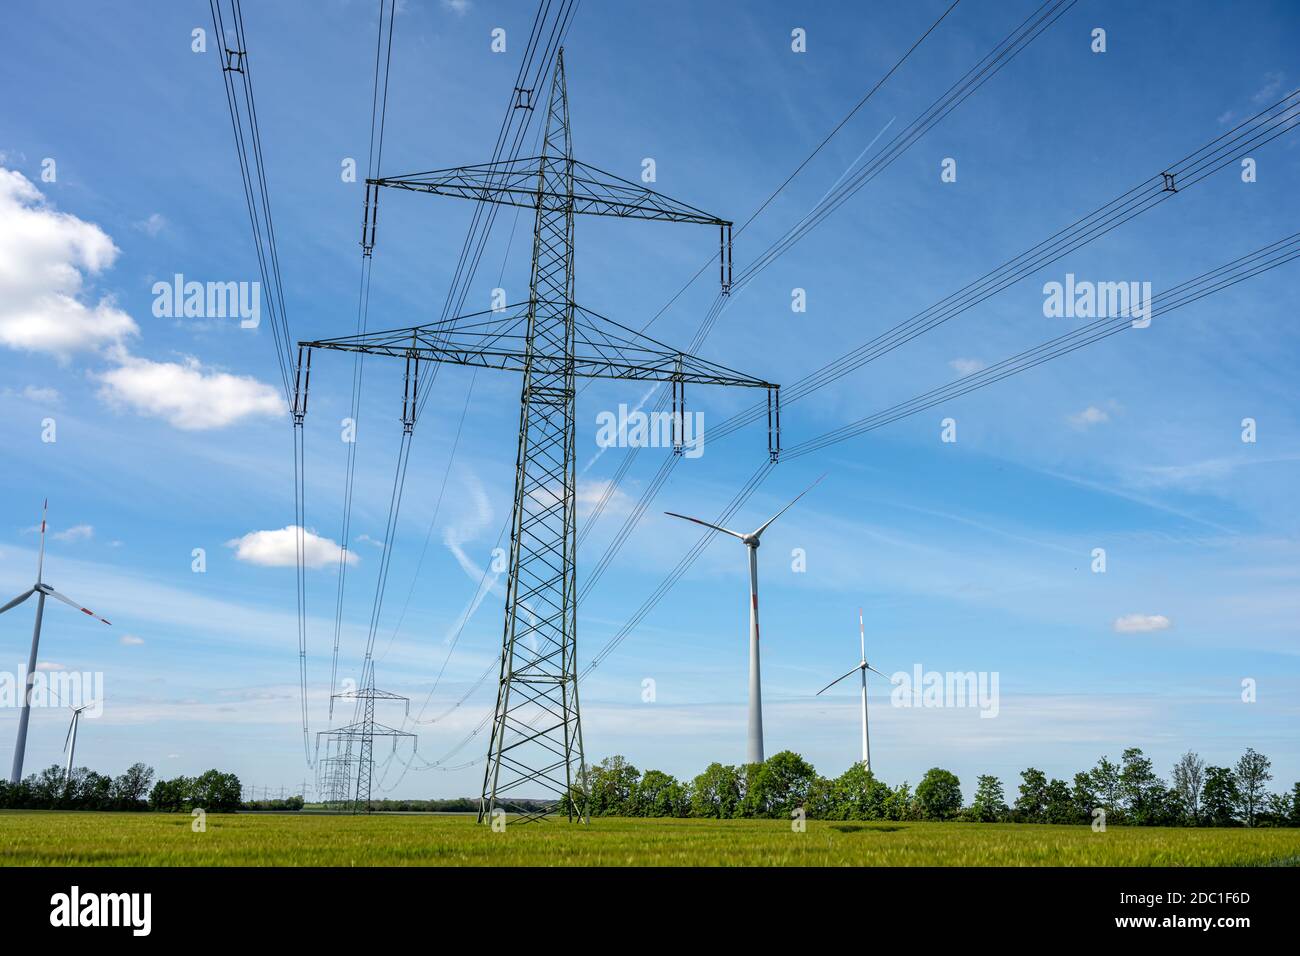 Electricity pylons and power lines seen in rural Germany Stock Photo